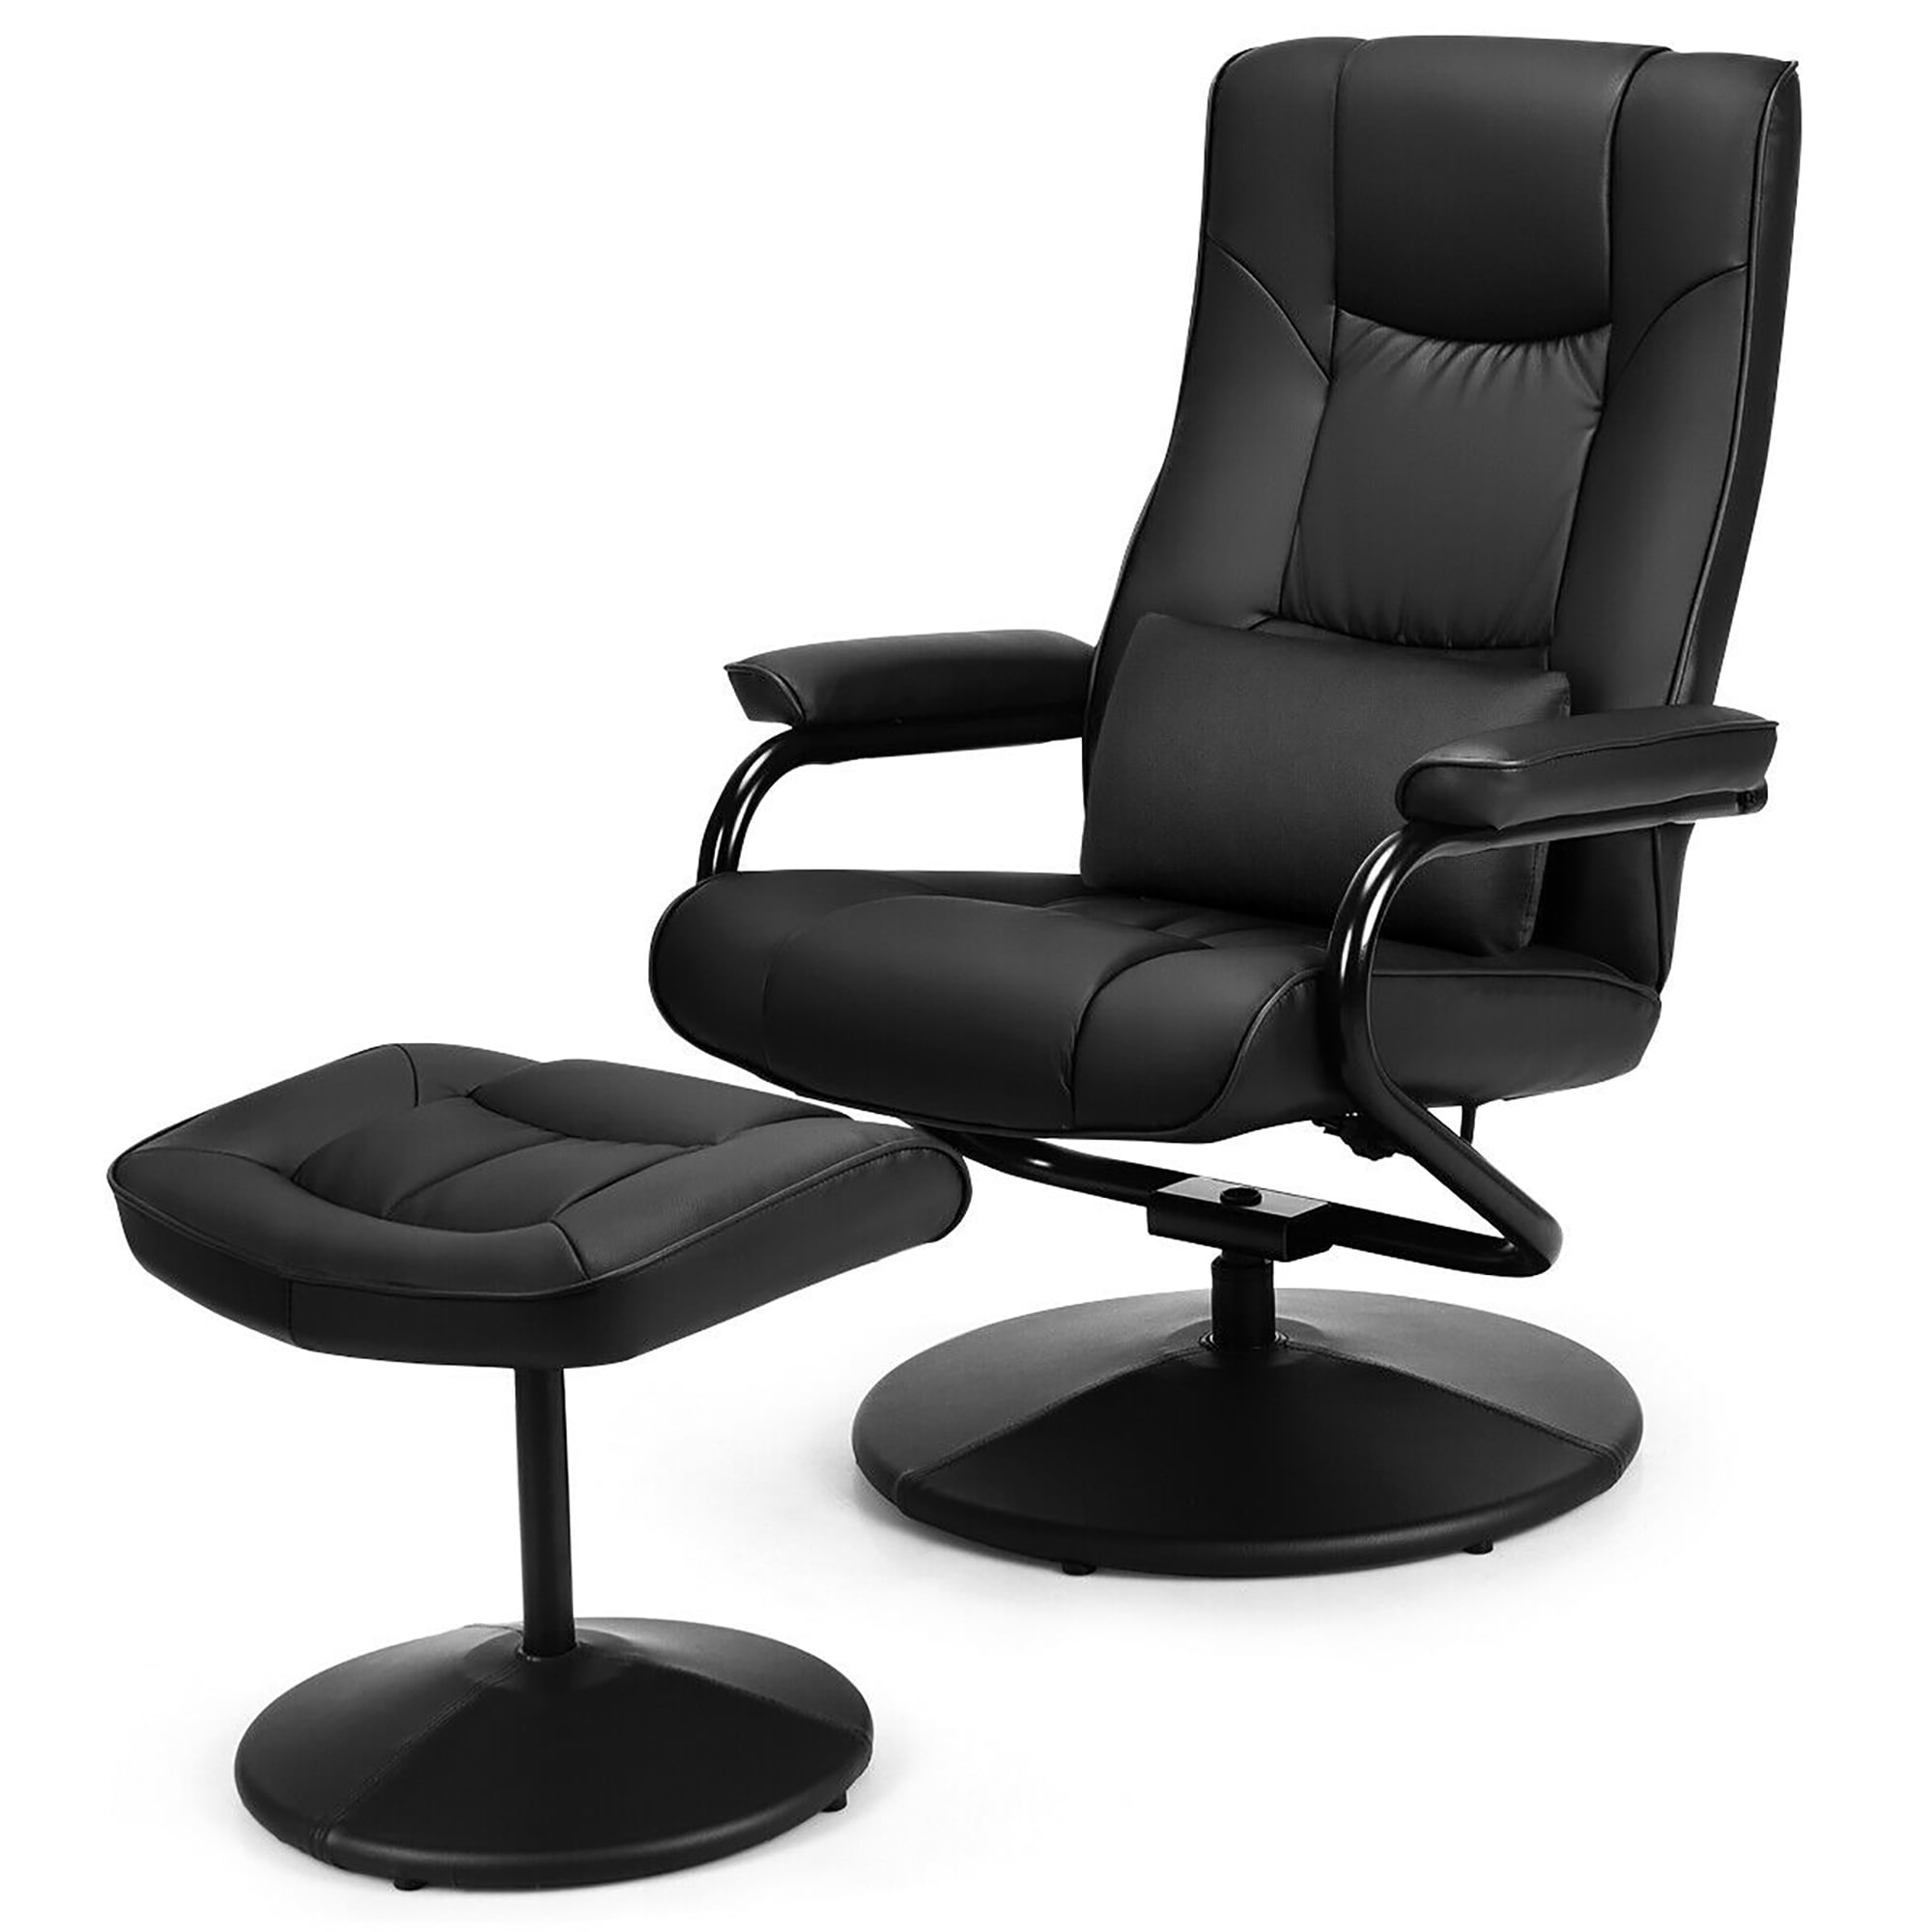 Unique Swivel Chair With Ottoman Walmart for Simple Design